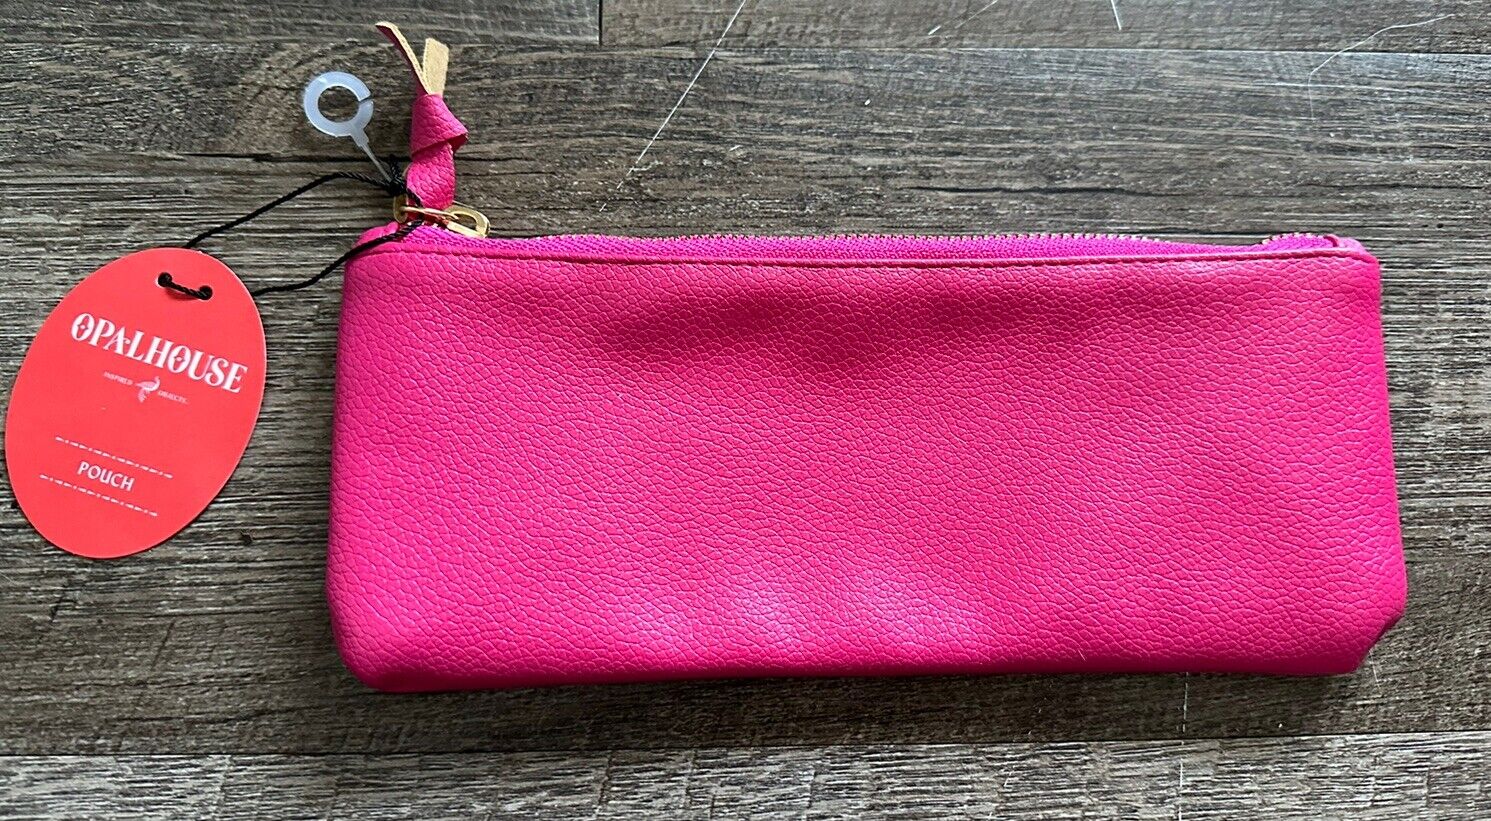 Opalhouse Zippered Pouch Pencil Case Makeup Change Pink & Gold NEW